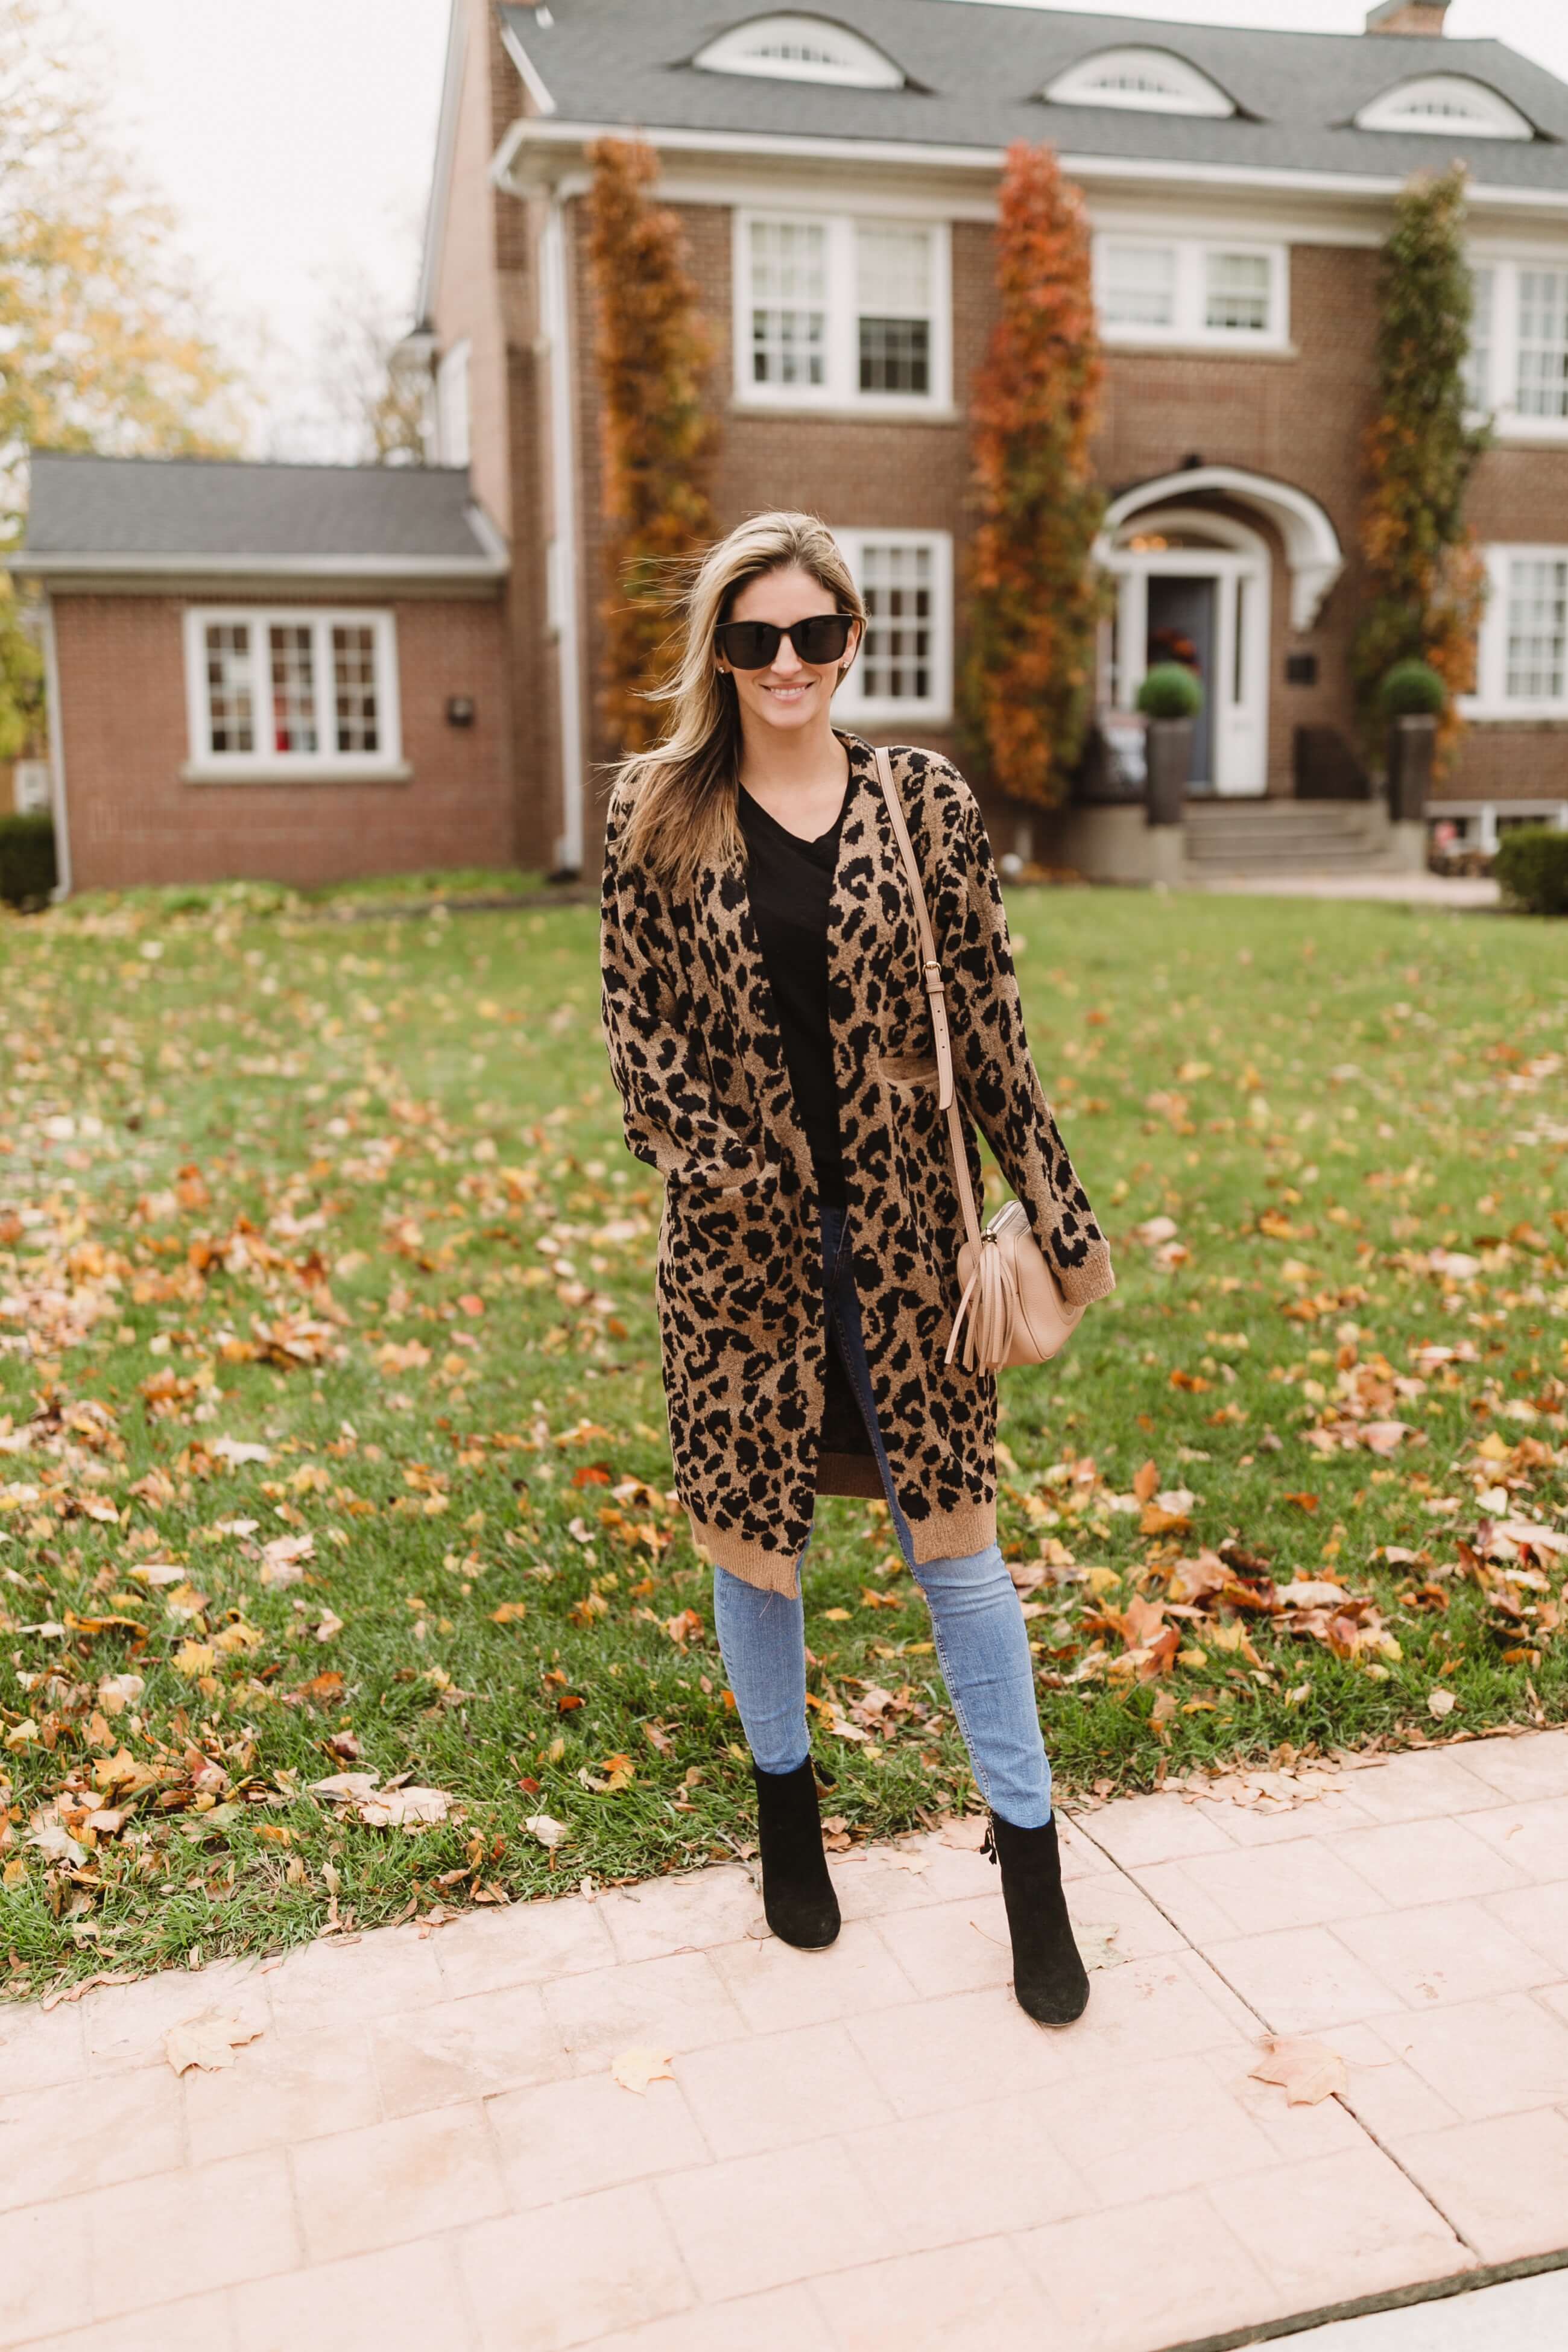 Leopard Chicwish sweater with pockets; winter style; winter longline cardigan Mandy FURNIS Whitby style blogger sparkleshinylove